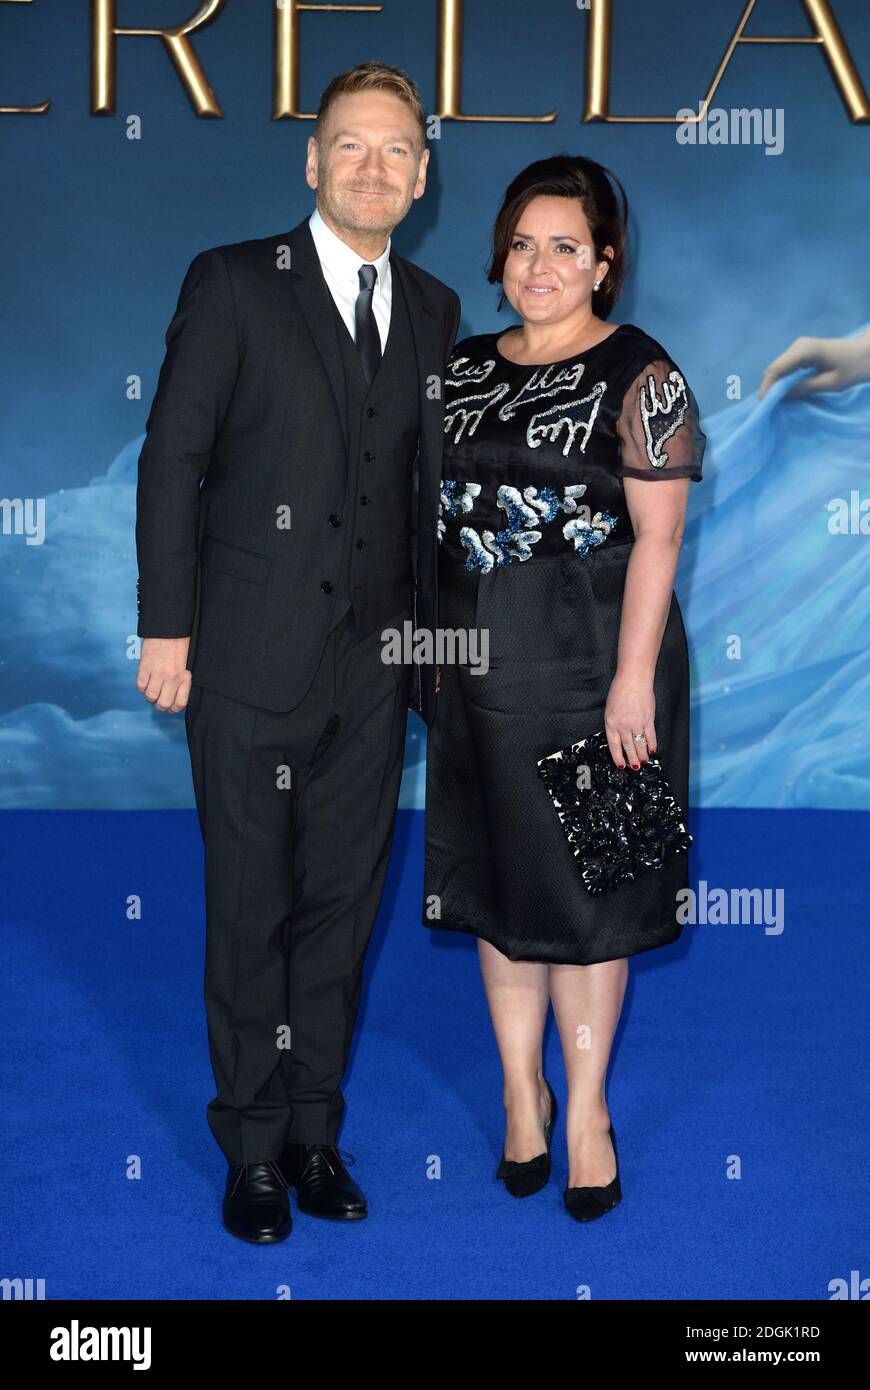 Director Kenneth Branagh and wife Lindsay Brunnock attends the UK Premiere of Disney's Cinderella held at the Odeon cinema in Leicester Square, London Stock Photo